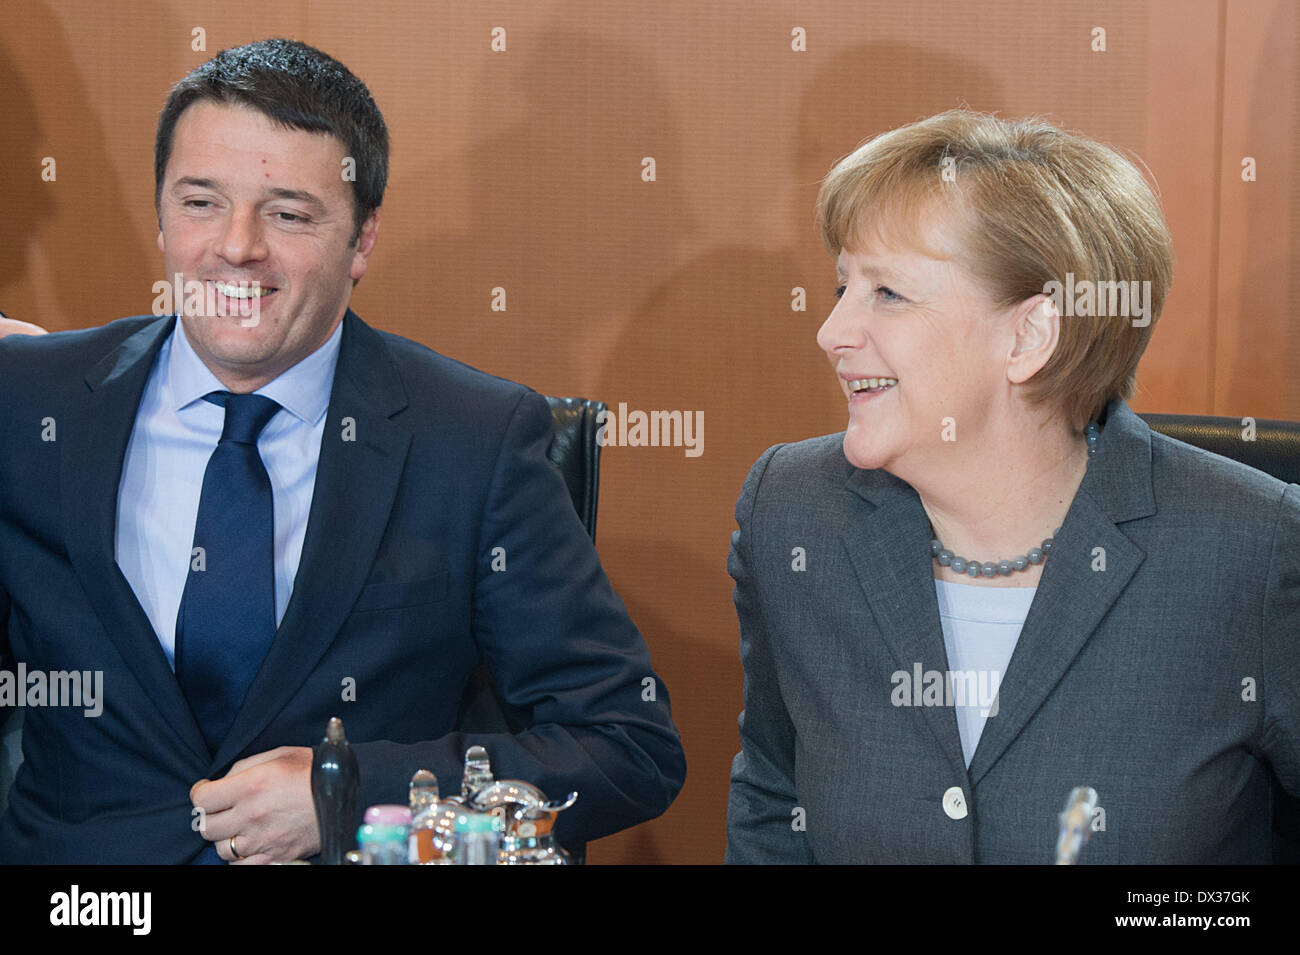 Berlin, Germany. 17th Mar, 2014. German Chancellor Angela Merkel (CDU, R) and new Italian Prime Minister Matteo Renzi meet with representatives of their governments for a cabinet session in the German Chancellery in Berlin, Germany, 17 March 2014. On his inaugural visit to Germany Renzi is accompanied by ministers during the German-Italian government consultations. Photo: Maurizio Gambarini/dpa/Alamy Live News Stock Photo